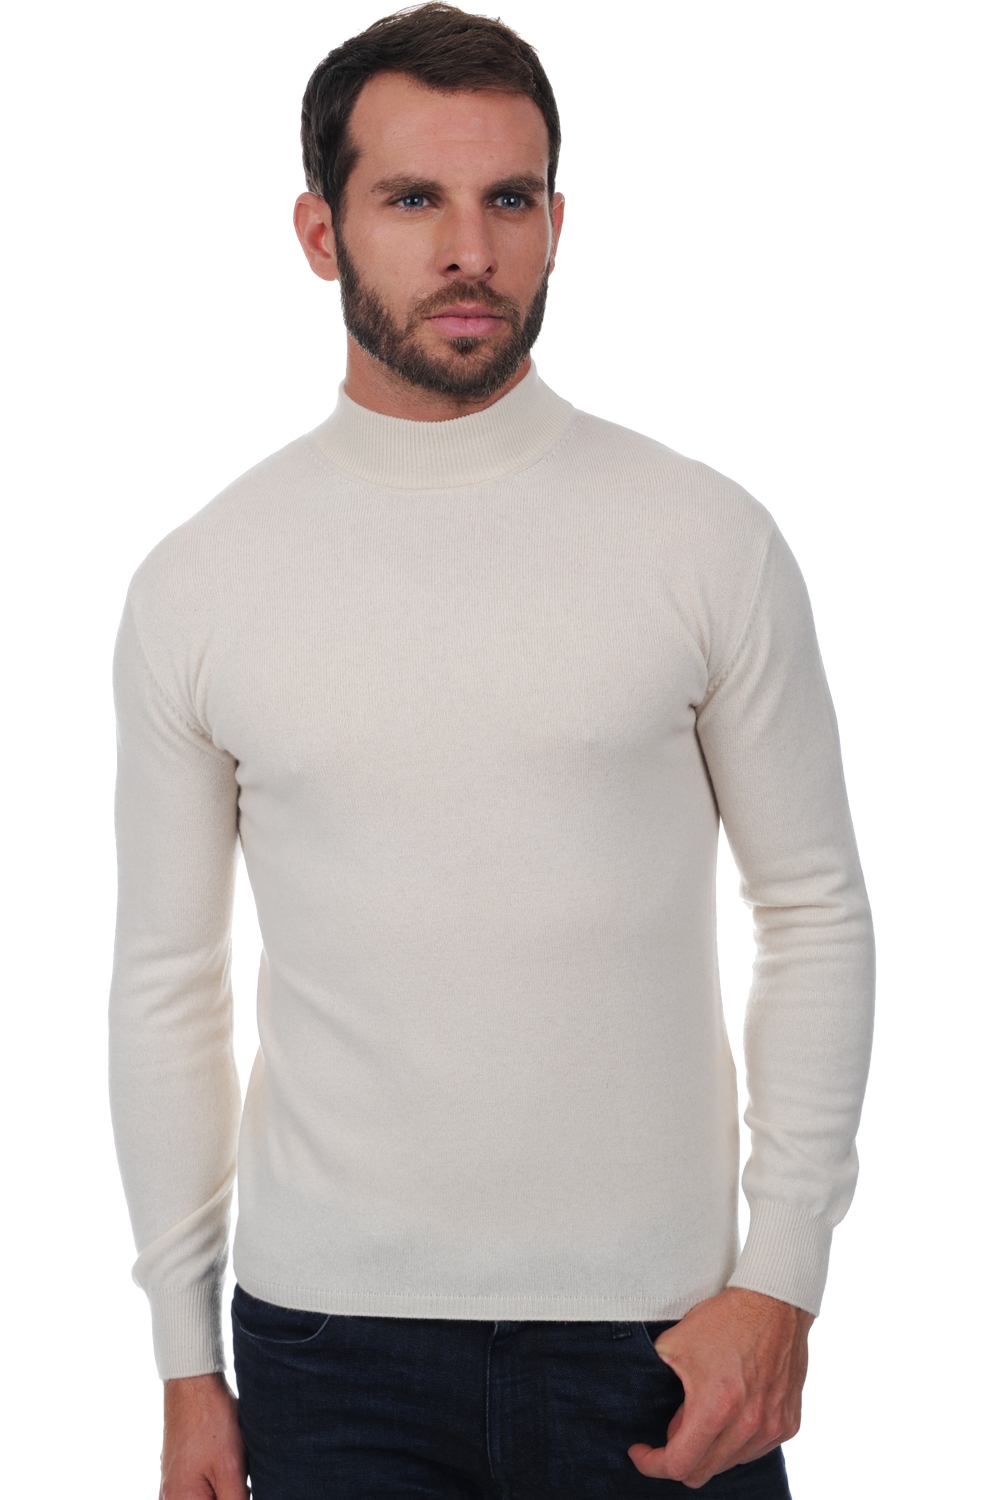 Cachemire pull homme col roule frederic ecru 3xl